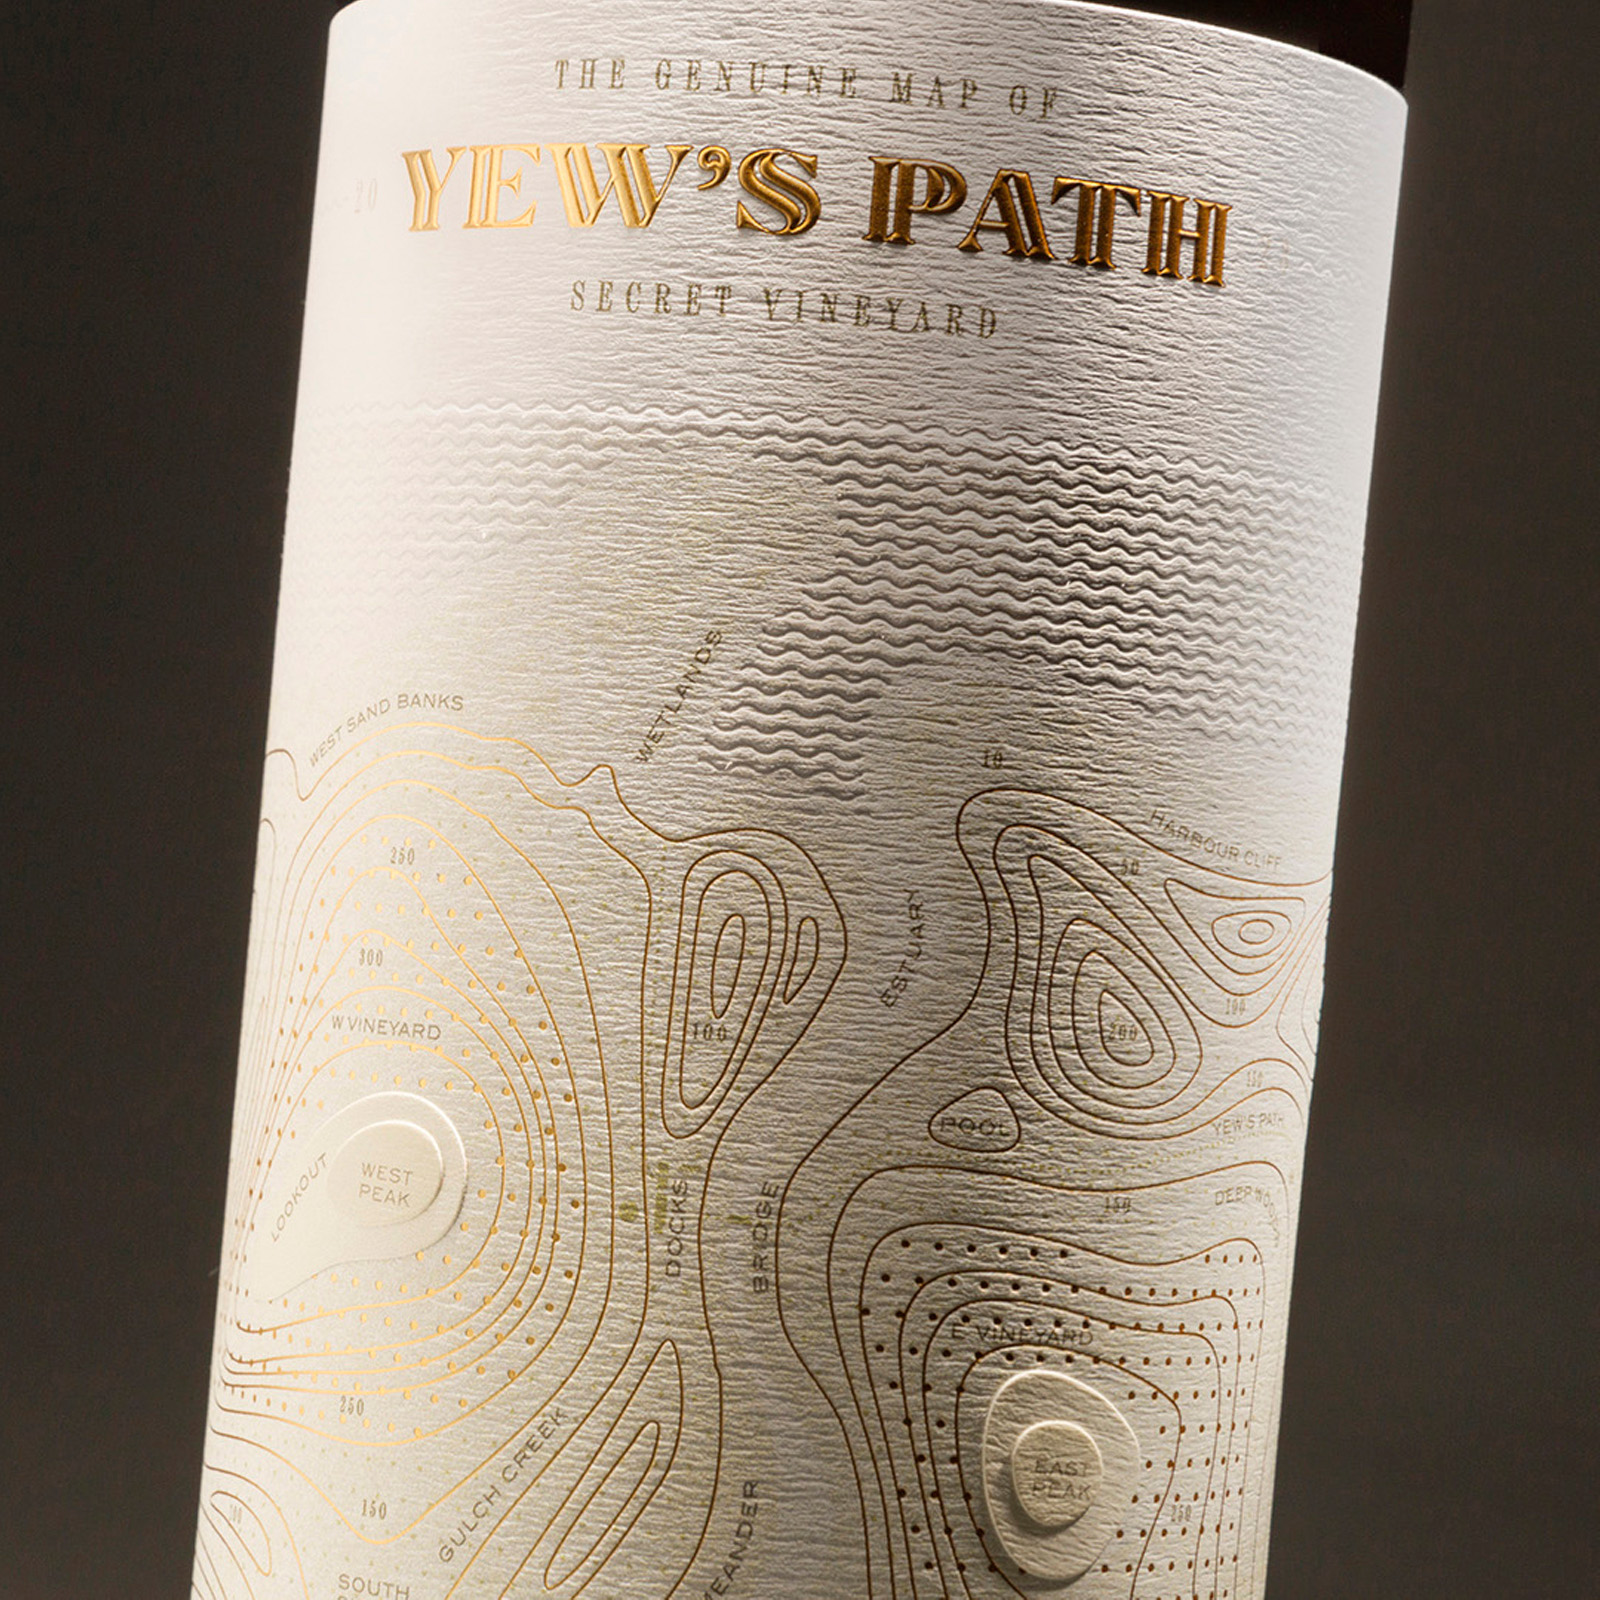 Pablo Guerrero Studio Unveils a Luxurious Wine Label Design for Yew’s Path, Blending Sensory Tactility with Opulence